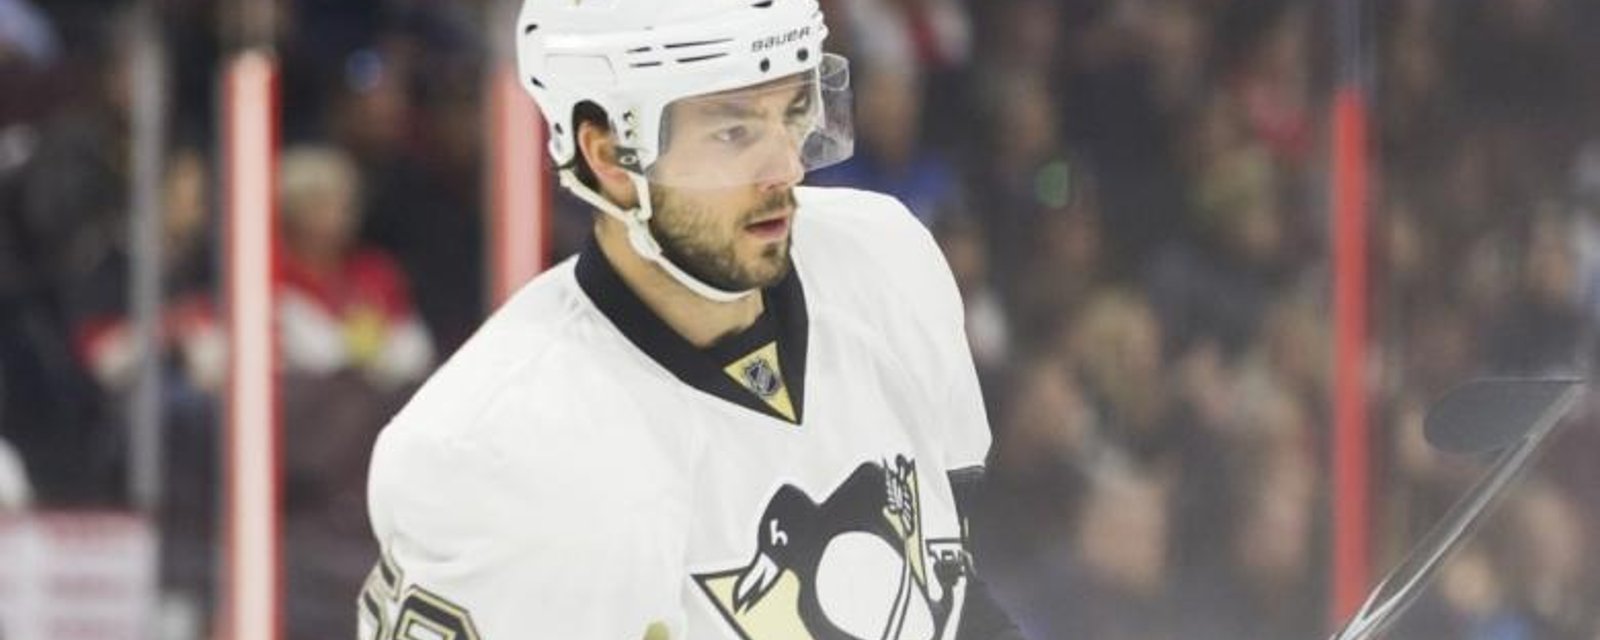 Breaking: Kris Letang has been suspended by the NHL.